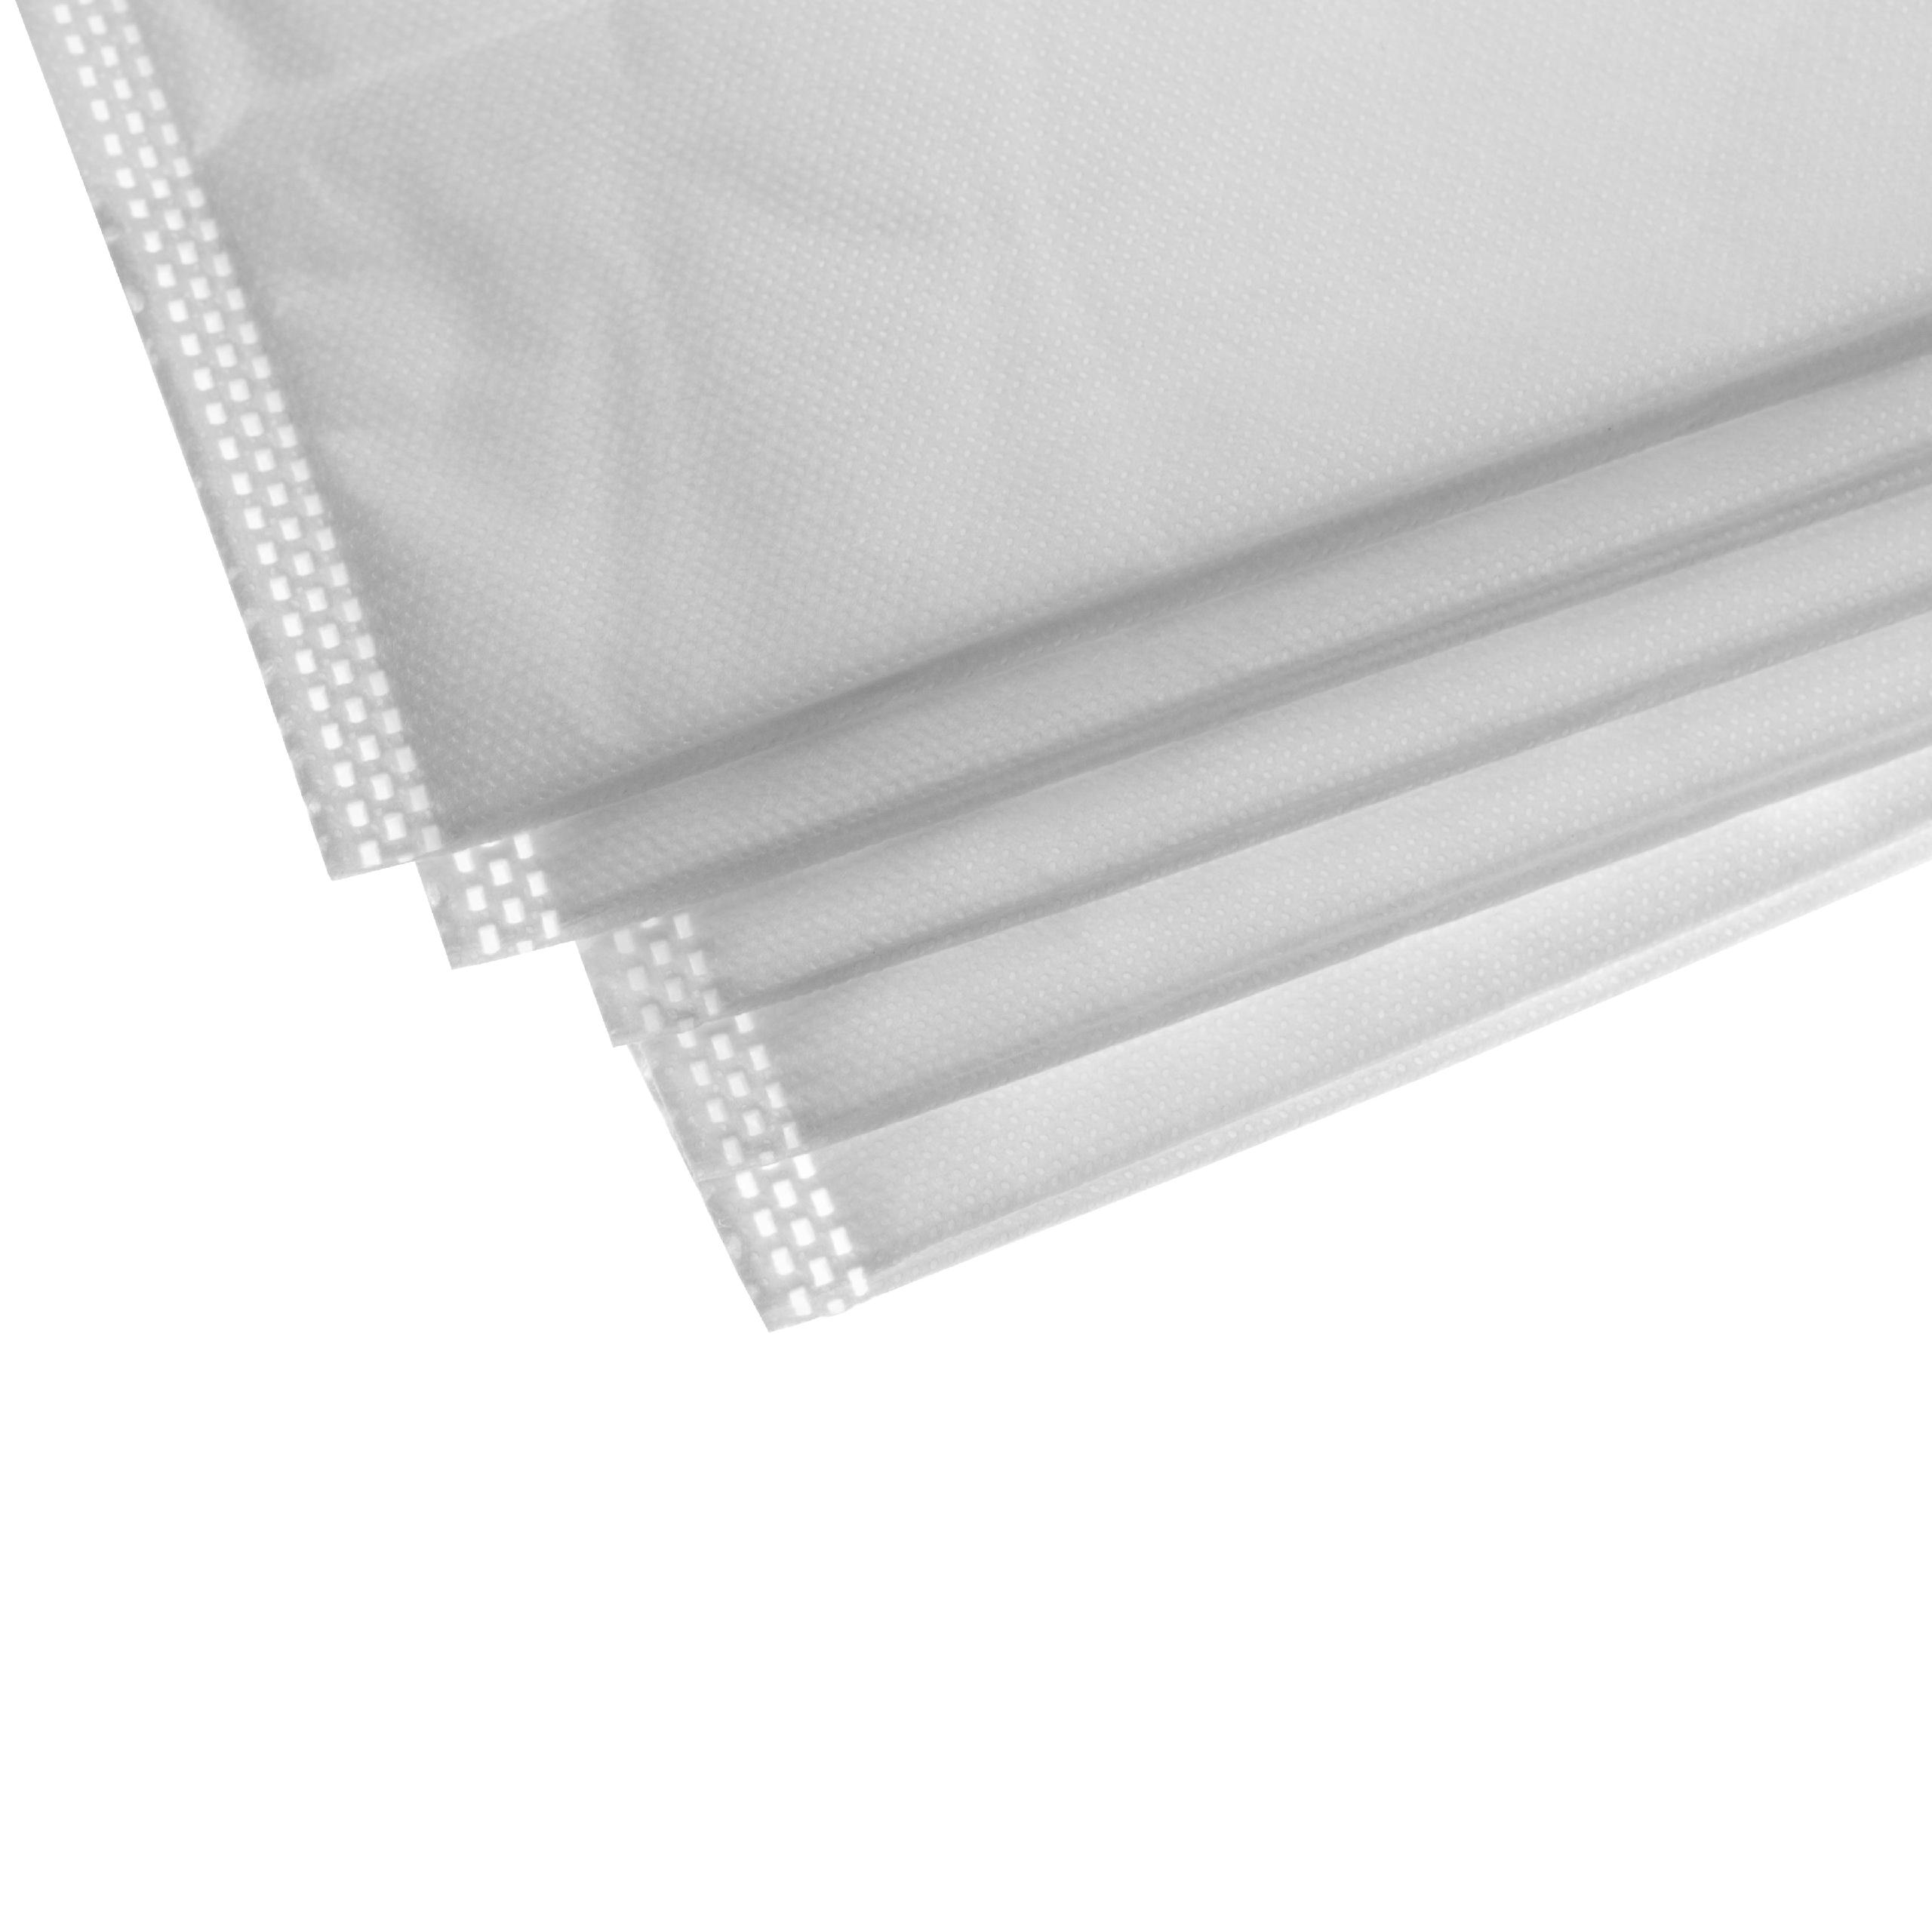 5x Vacuum Cleaner Bag replaces Thomas 450, 787179, 787114 for Thomas - microfleece